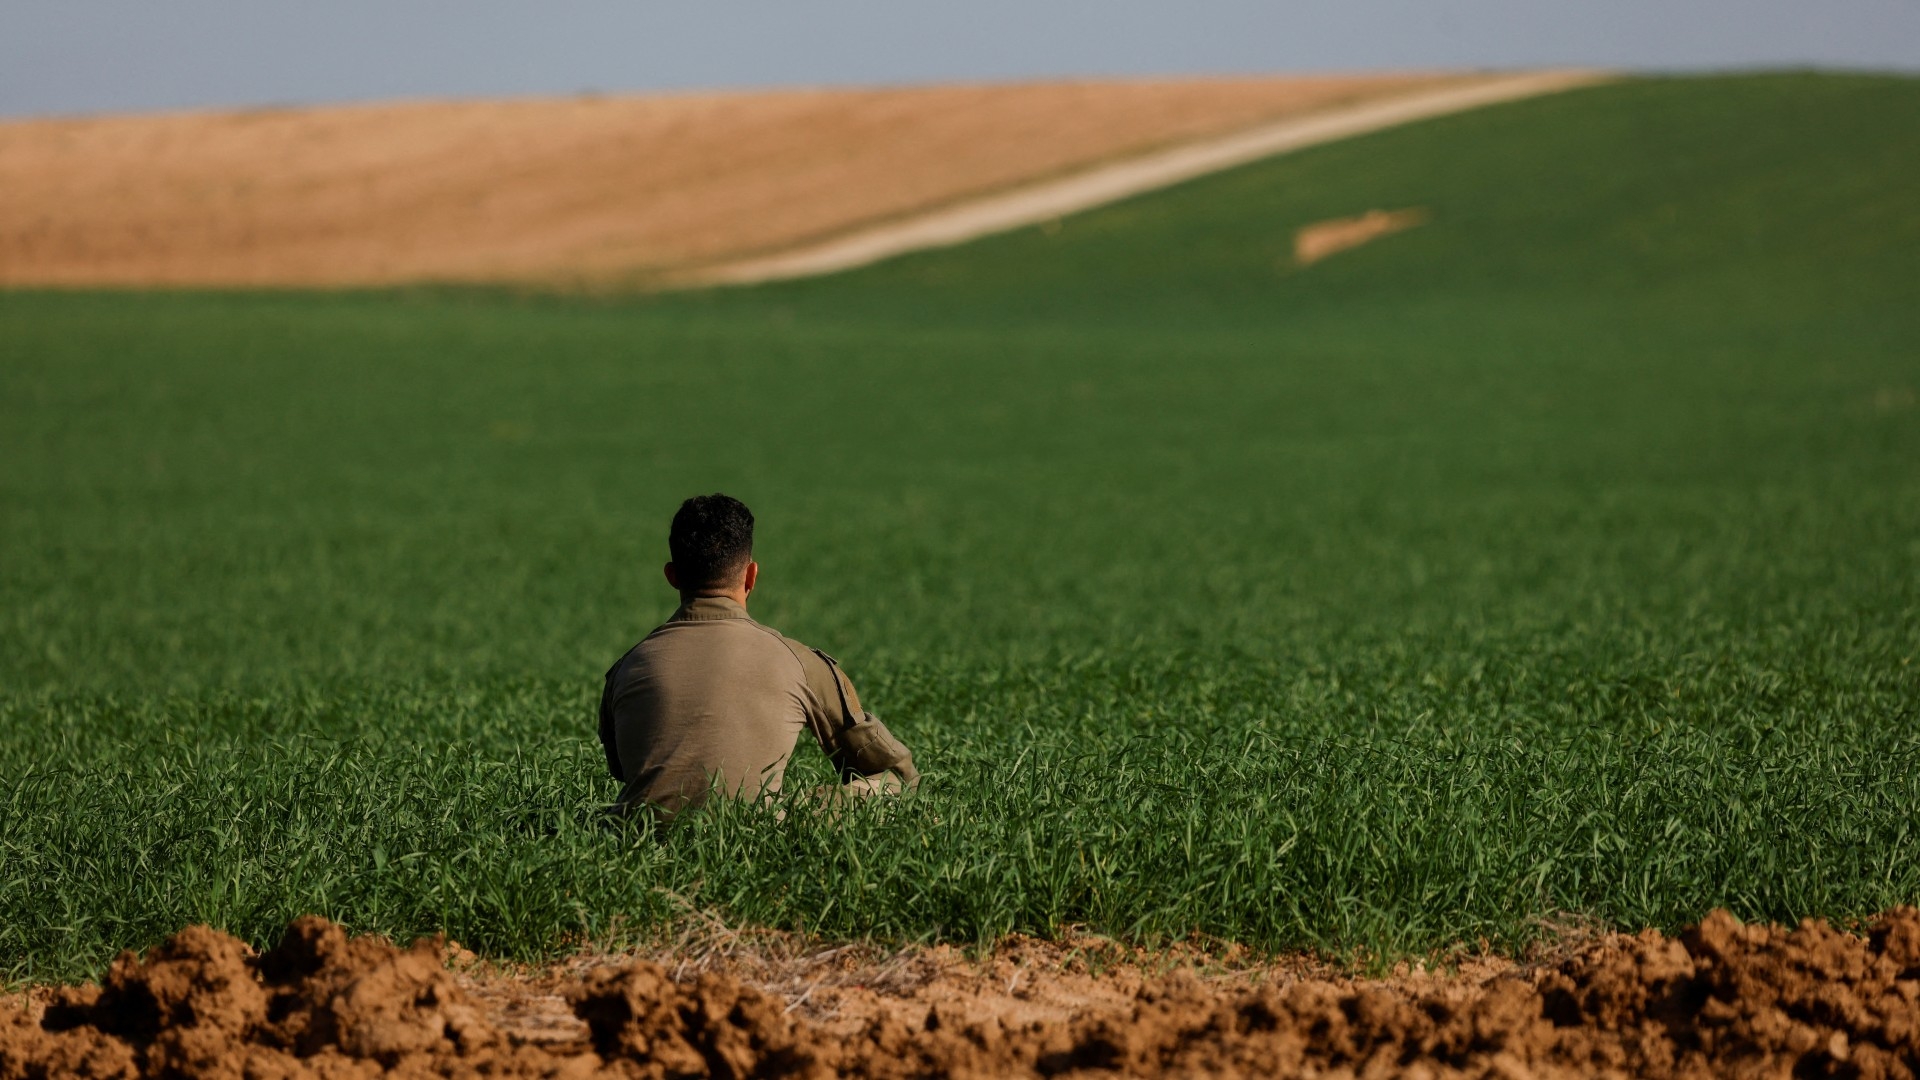 An Israeli soldier sits in a field near the Israel-Gaza boundary, in Israel, 30 December (Reuters/Amir Cohen)